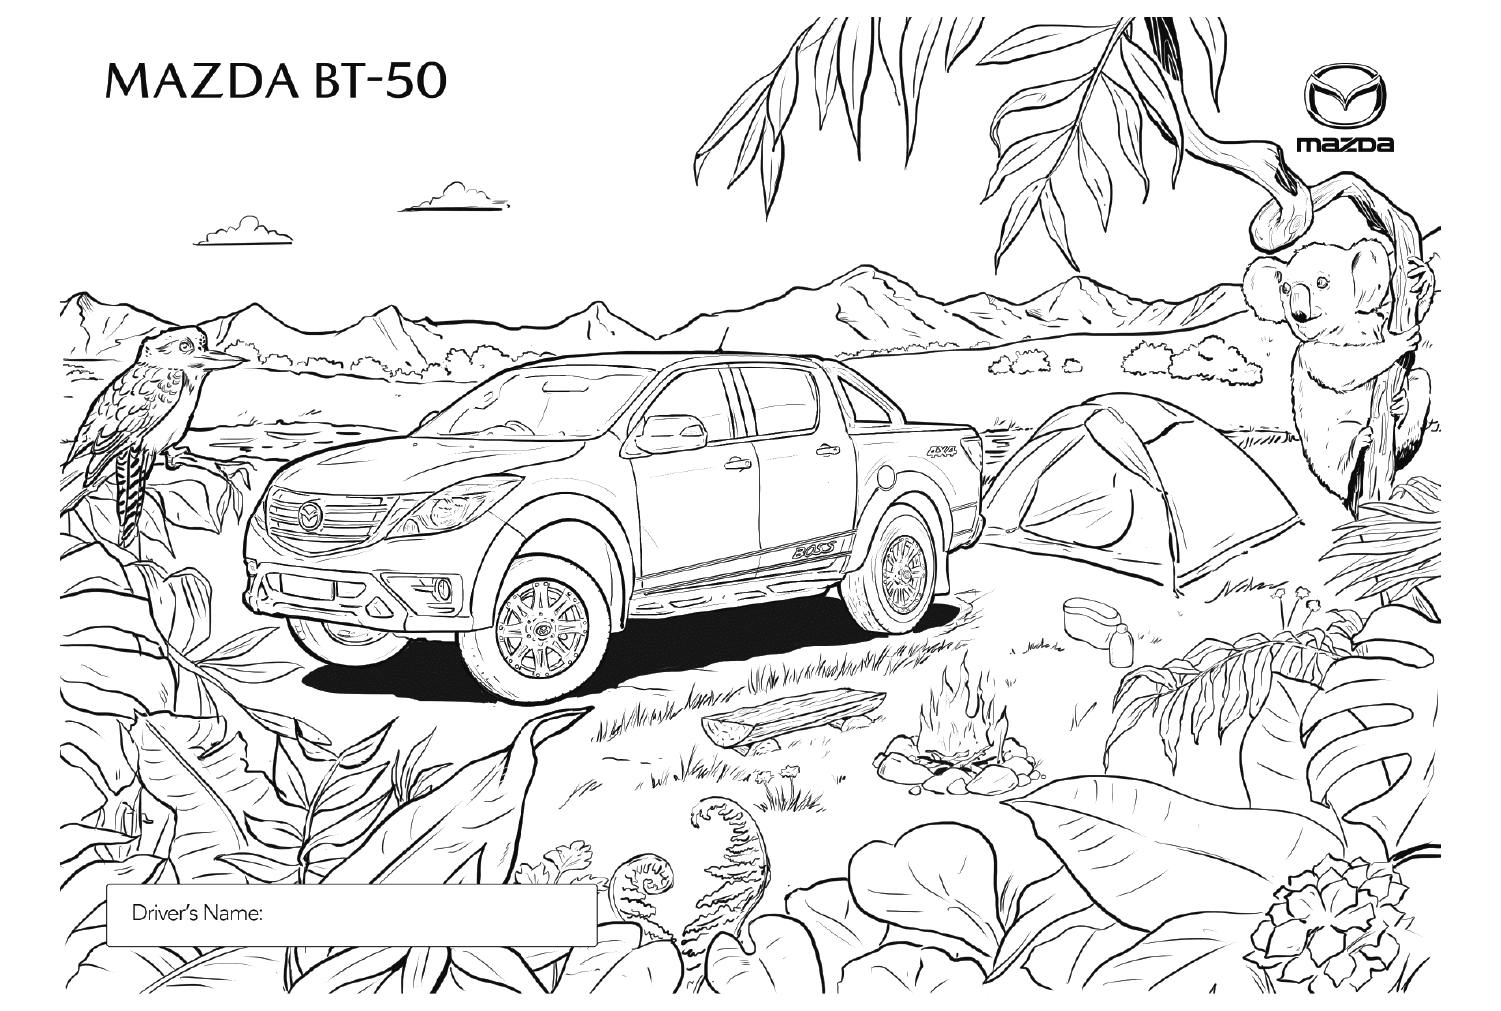 Mazda BT-50 Coloring Page from Mazda